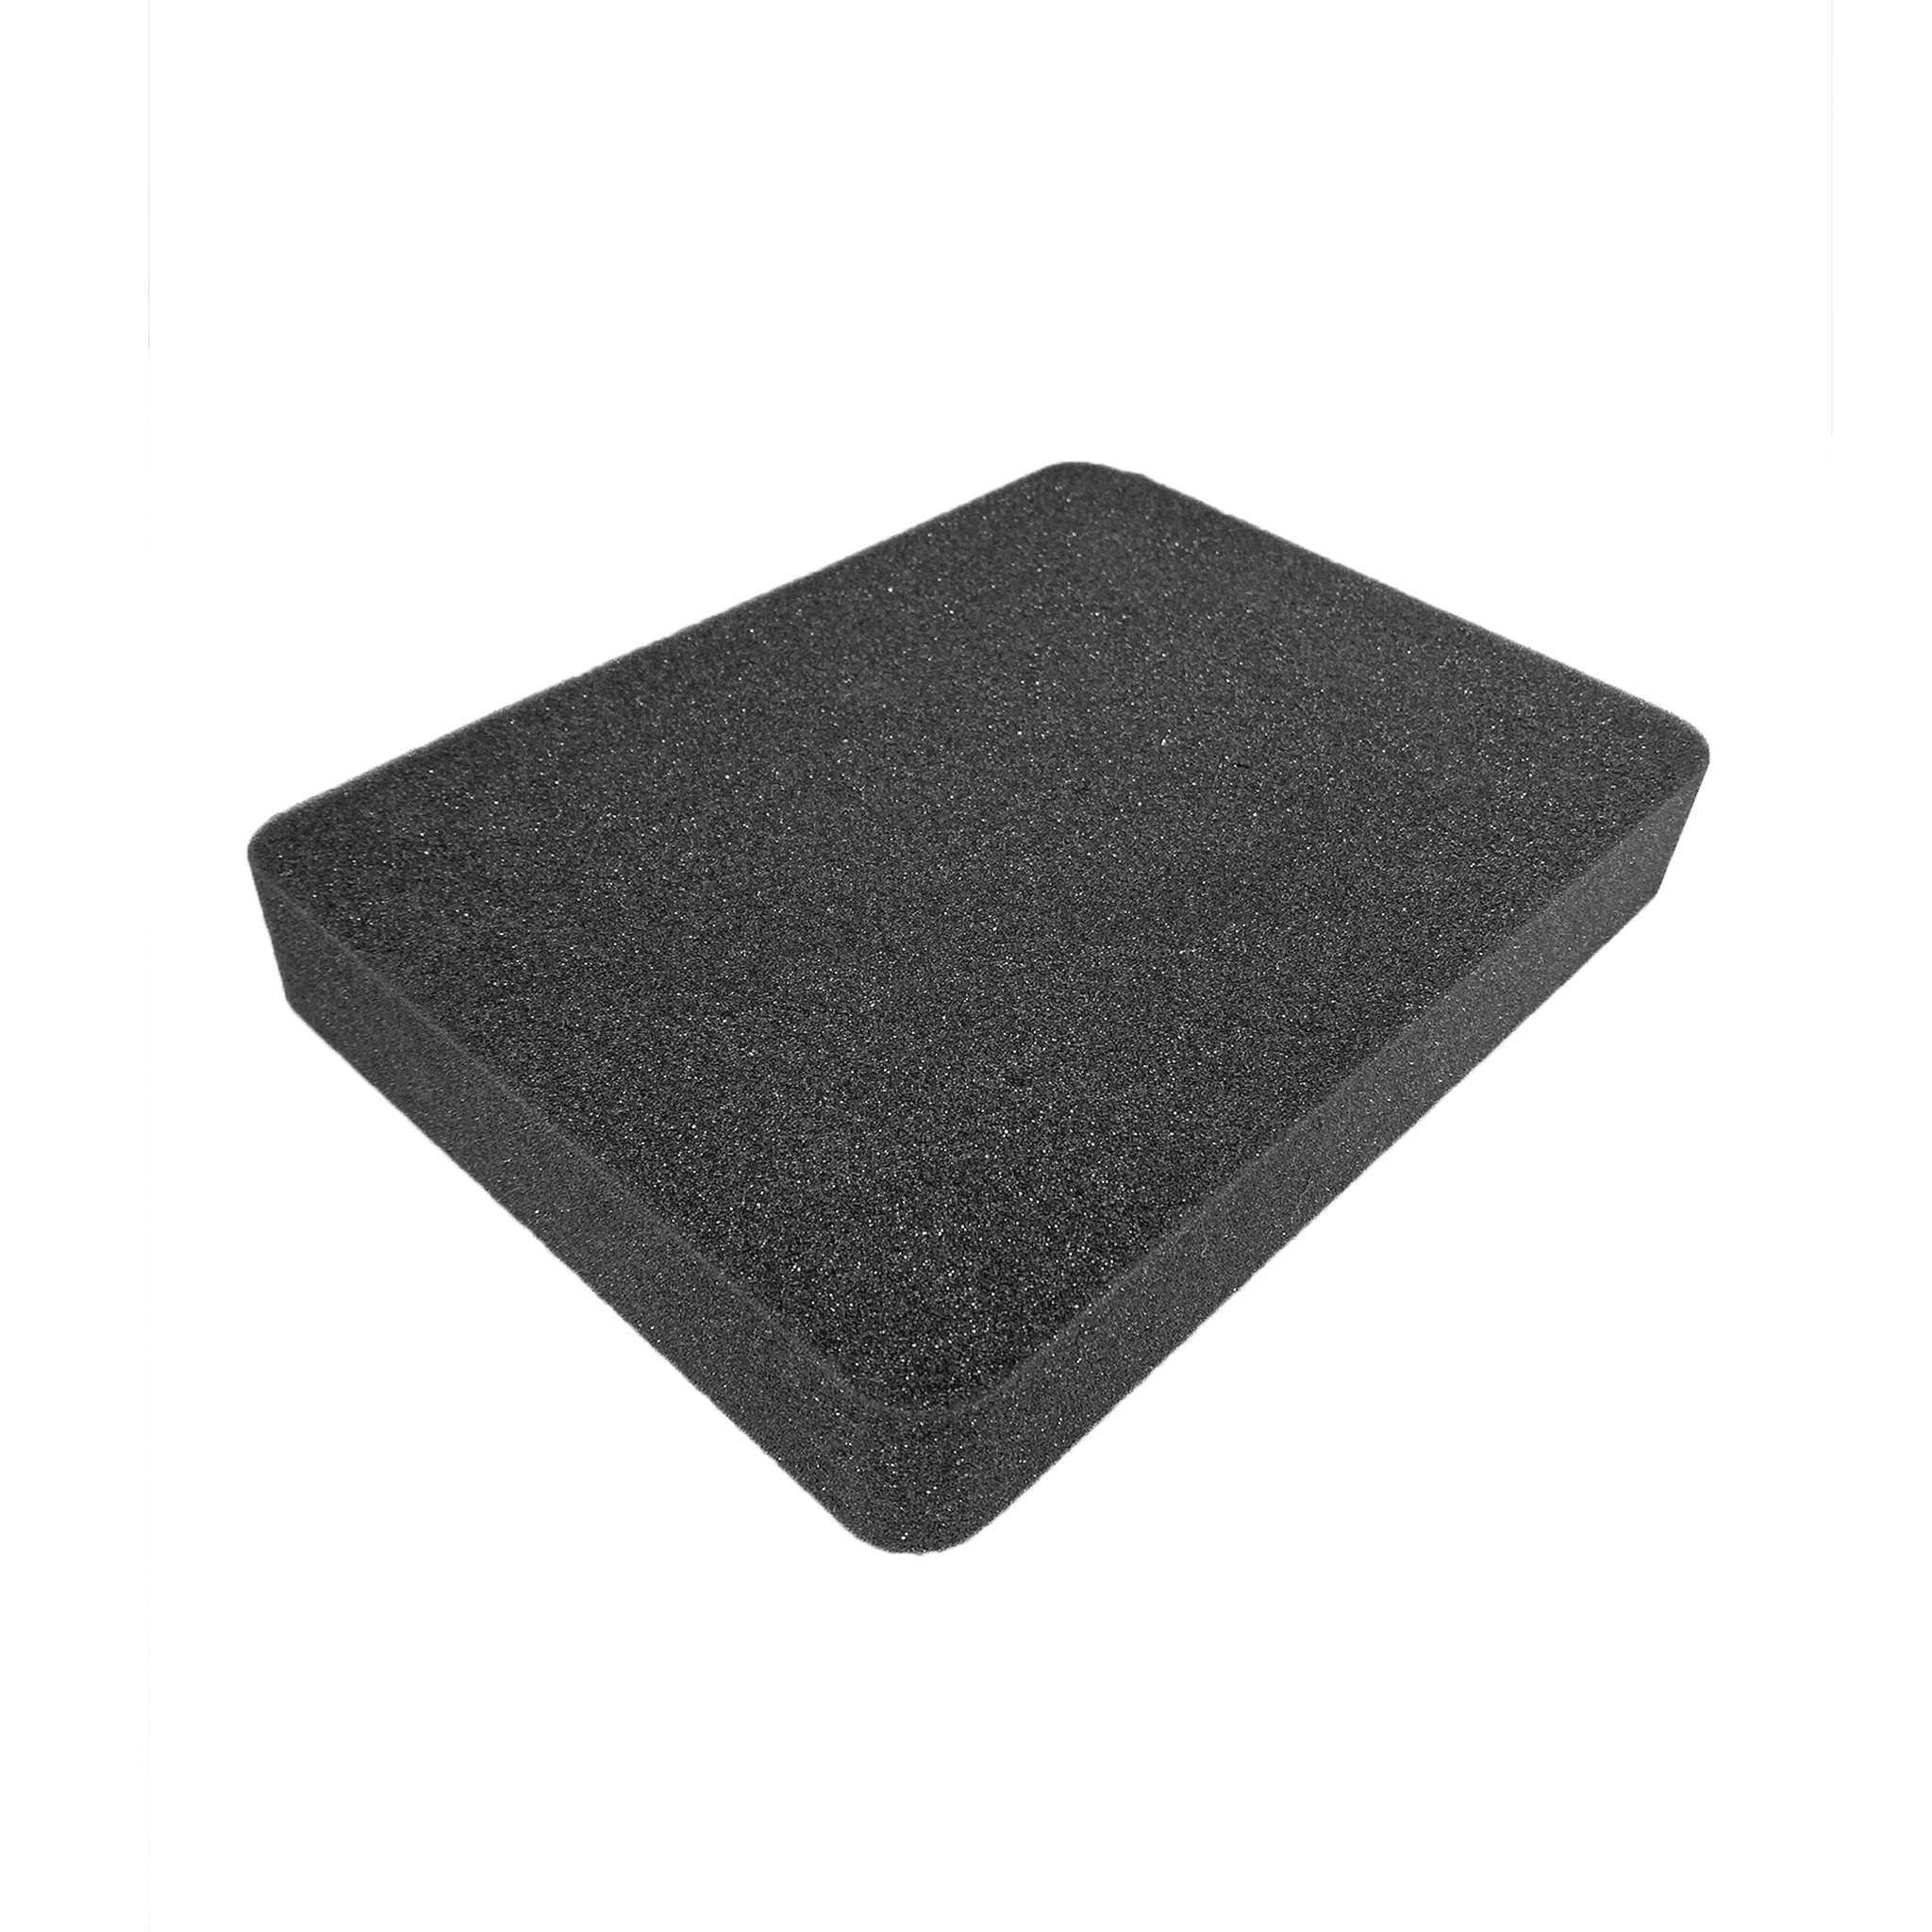 Pick Pluck Charcoal Foam THICK Sheet 11 X 15 X 3 with 1/2 pull